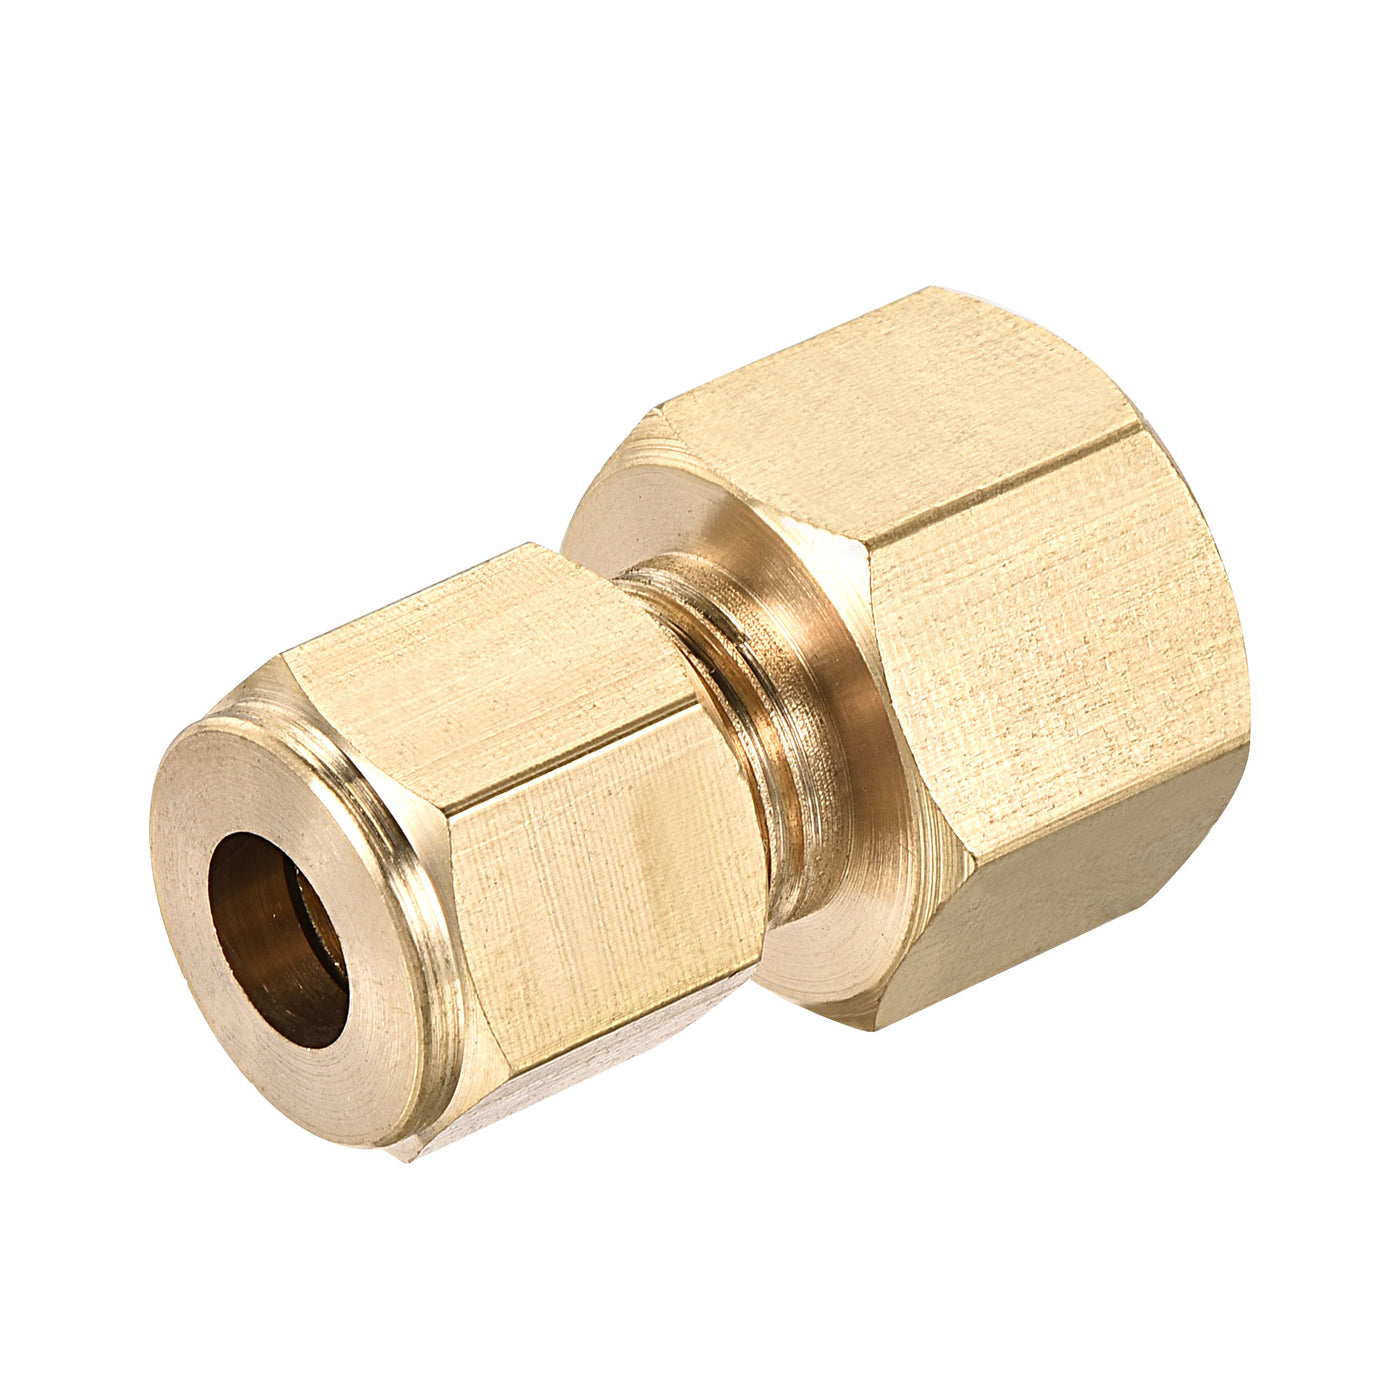 Uxcell Uxcell Compression Tube Fitting G3/8 Female Thread x 10mm Tube OD Straight Coupling Adapter Brass